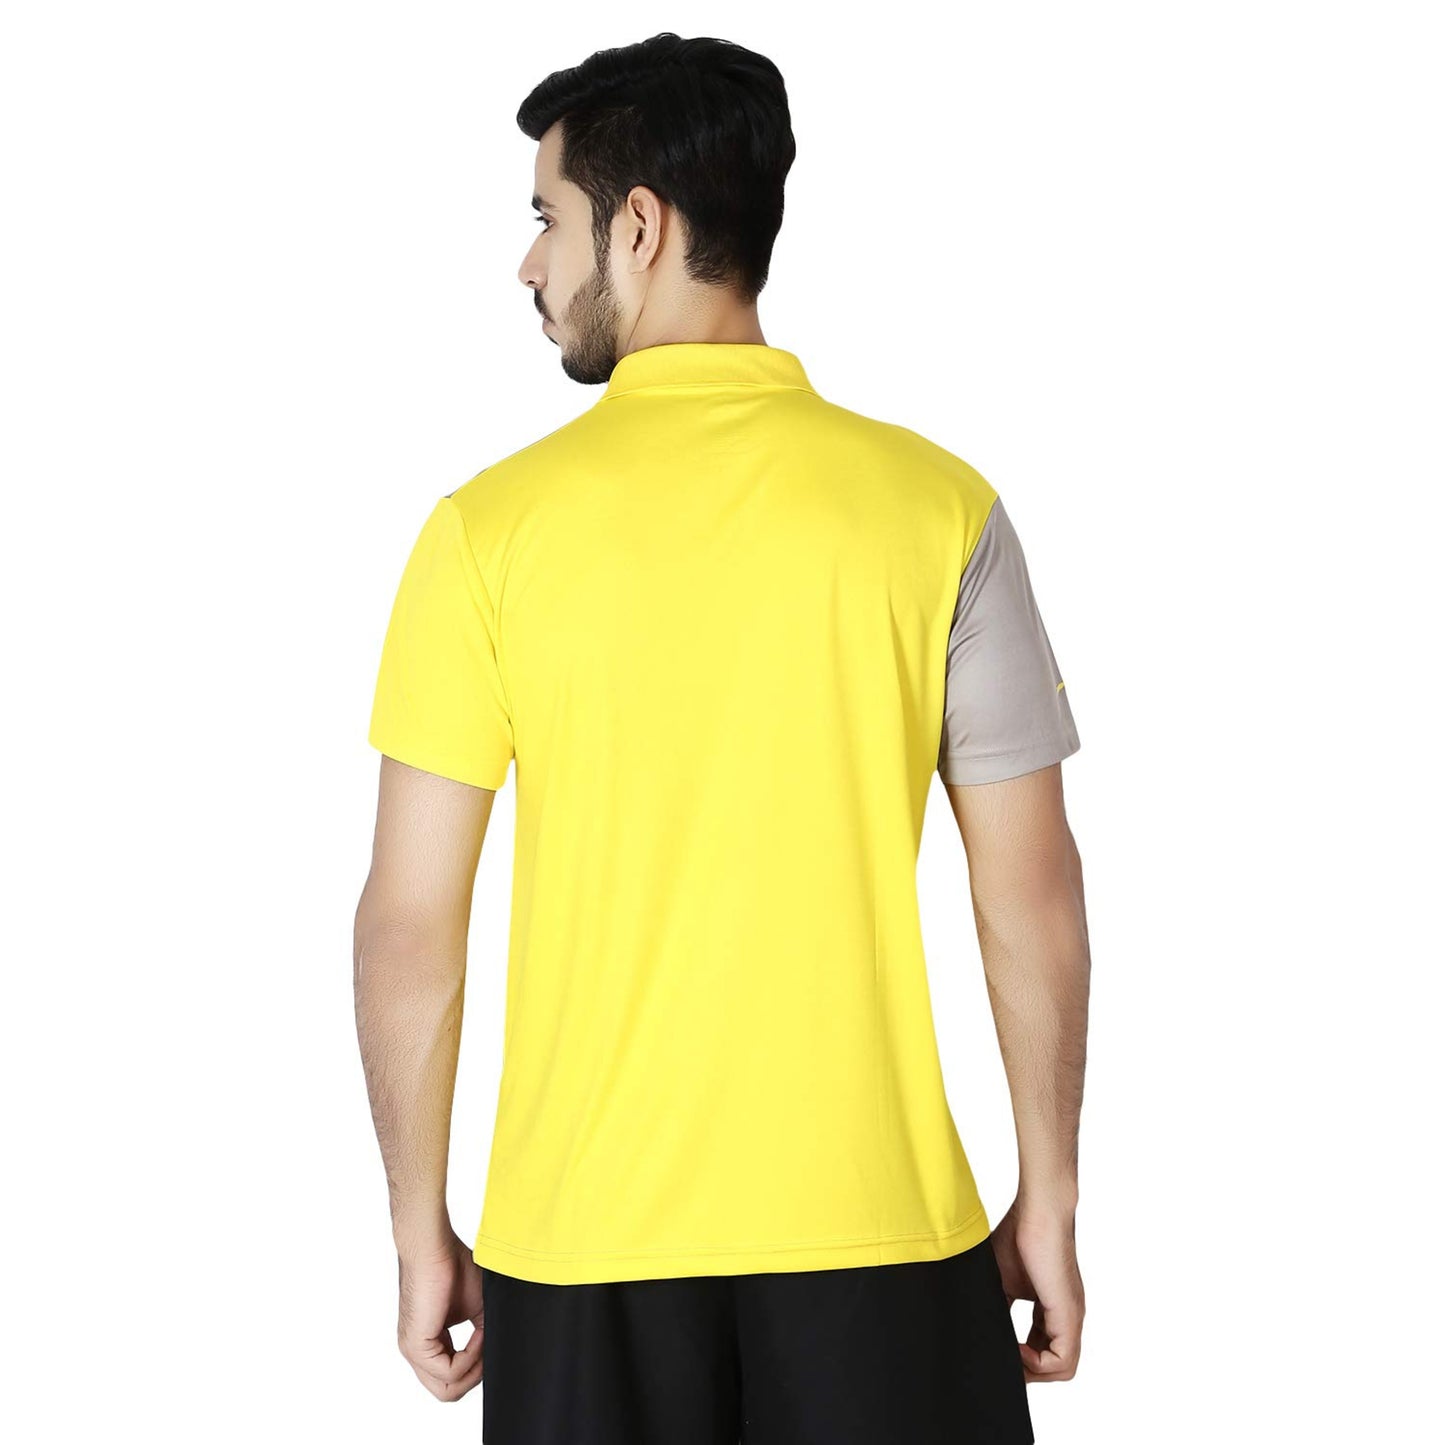 Stag Men's Solid Regular Fit T-Shirt (Model : Shell/Grey Yellow)